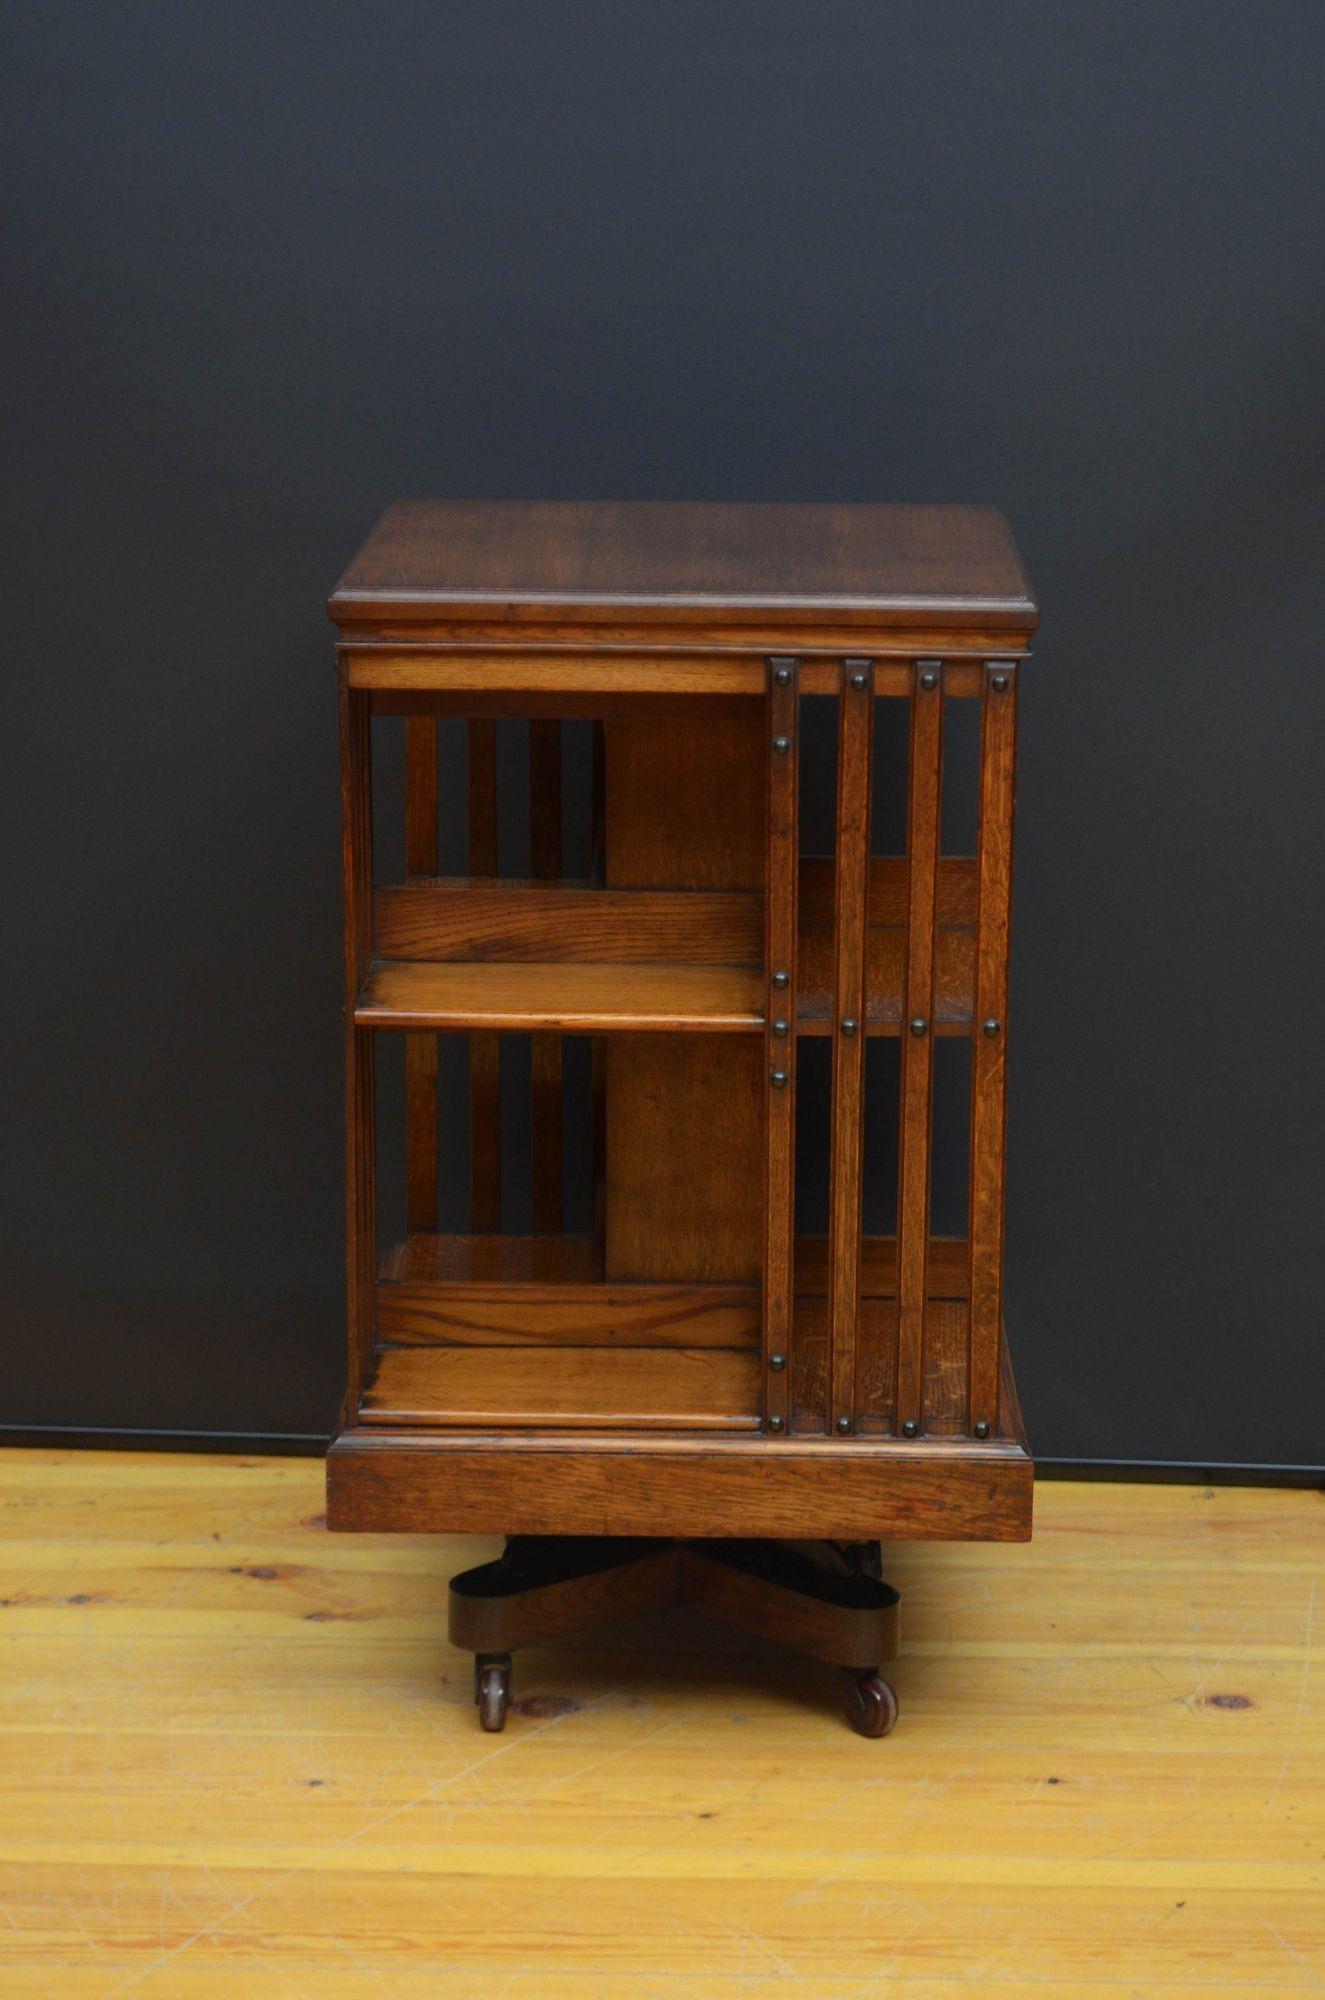 St048 Fine quality Maple and Co solid oak revolving bookcase, having square top with moulded edge above four open sides with reeded slatted uprights, standing on cross stretchers and castors. This antique bookcase bears maker’s label, Maple and Co.